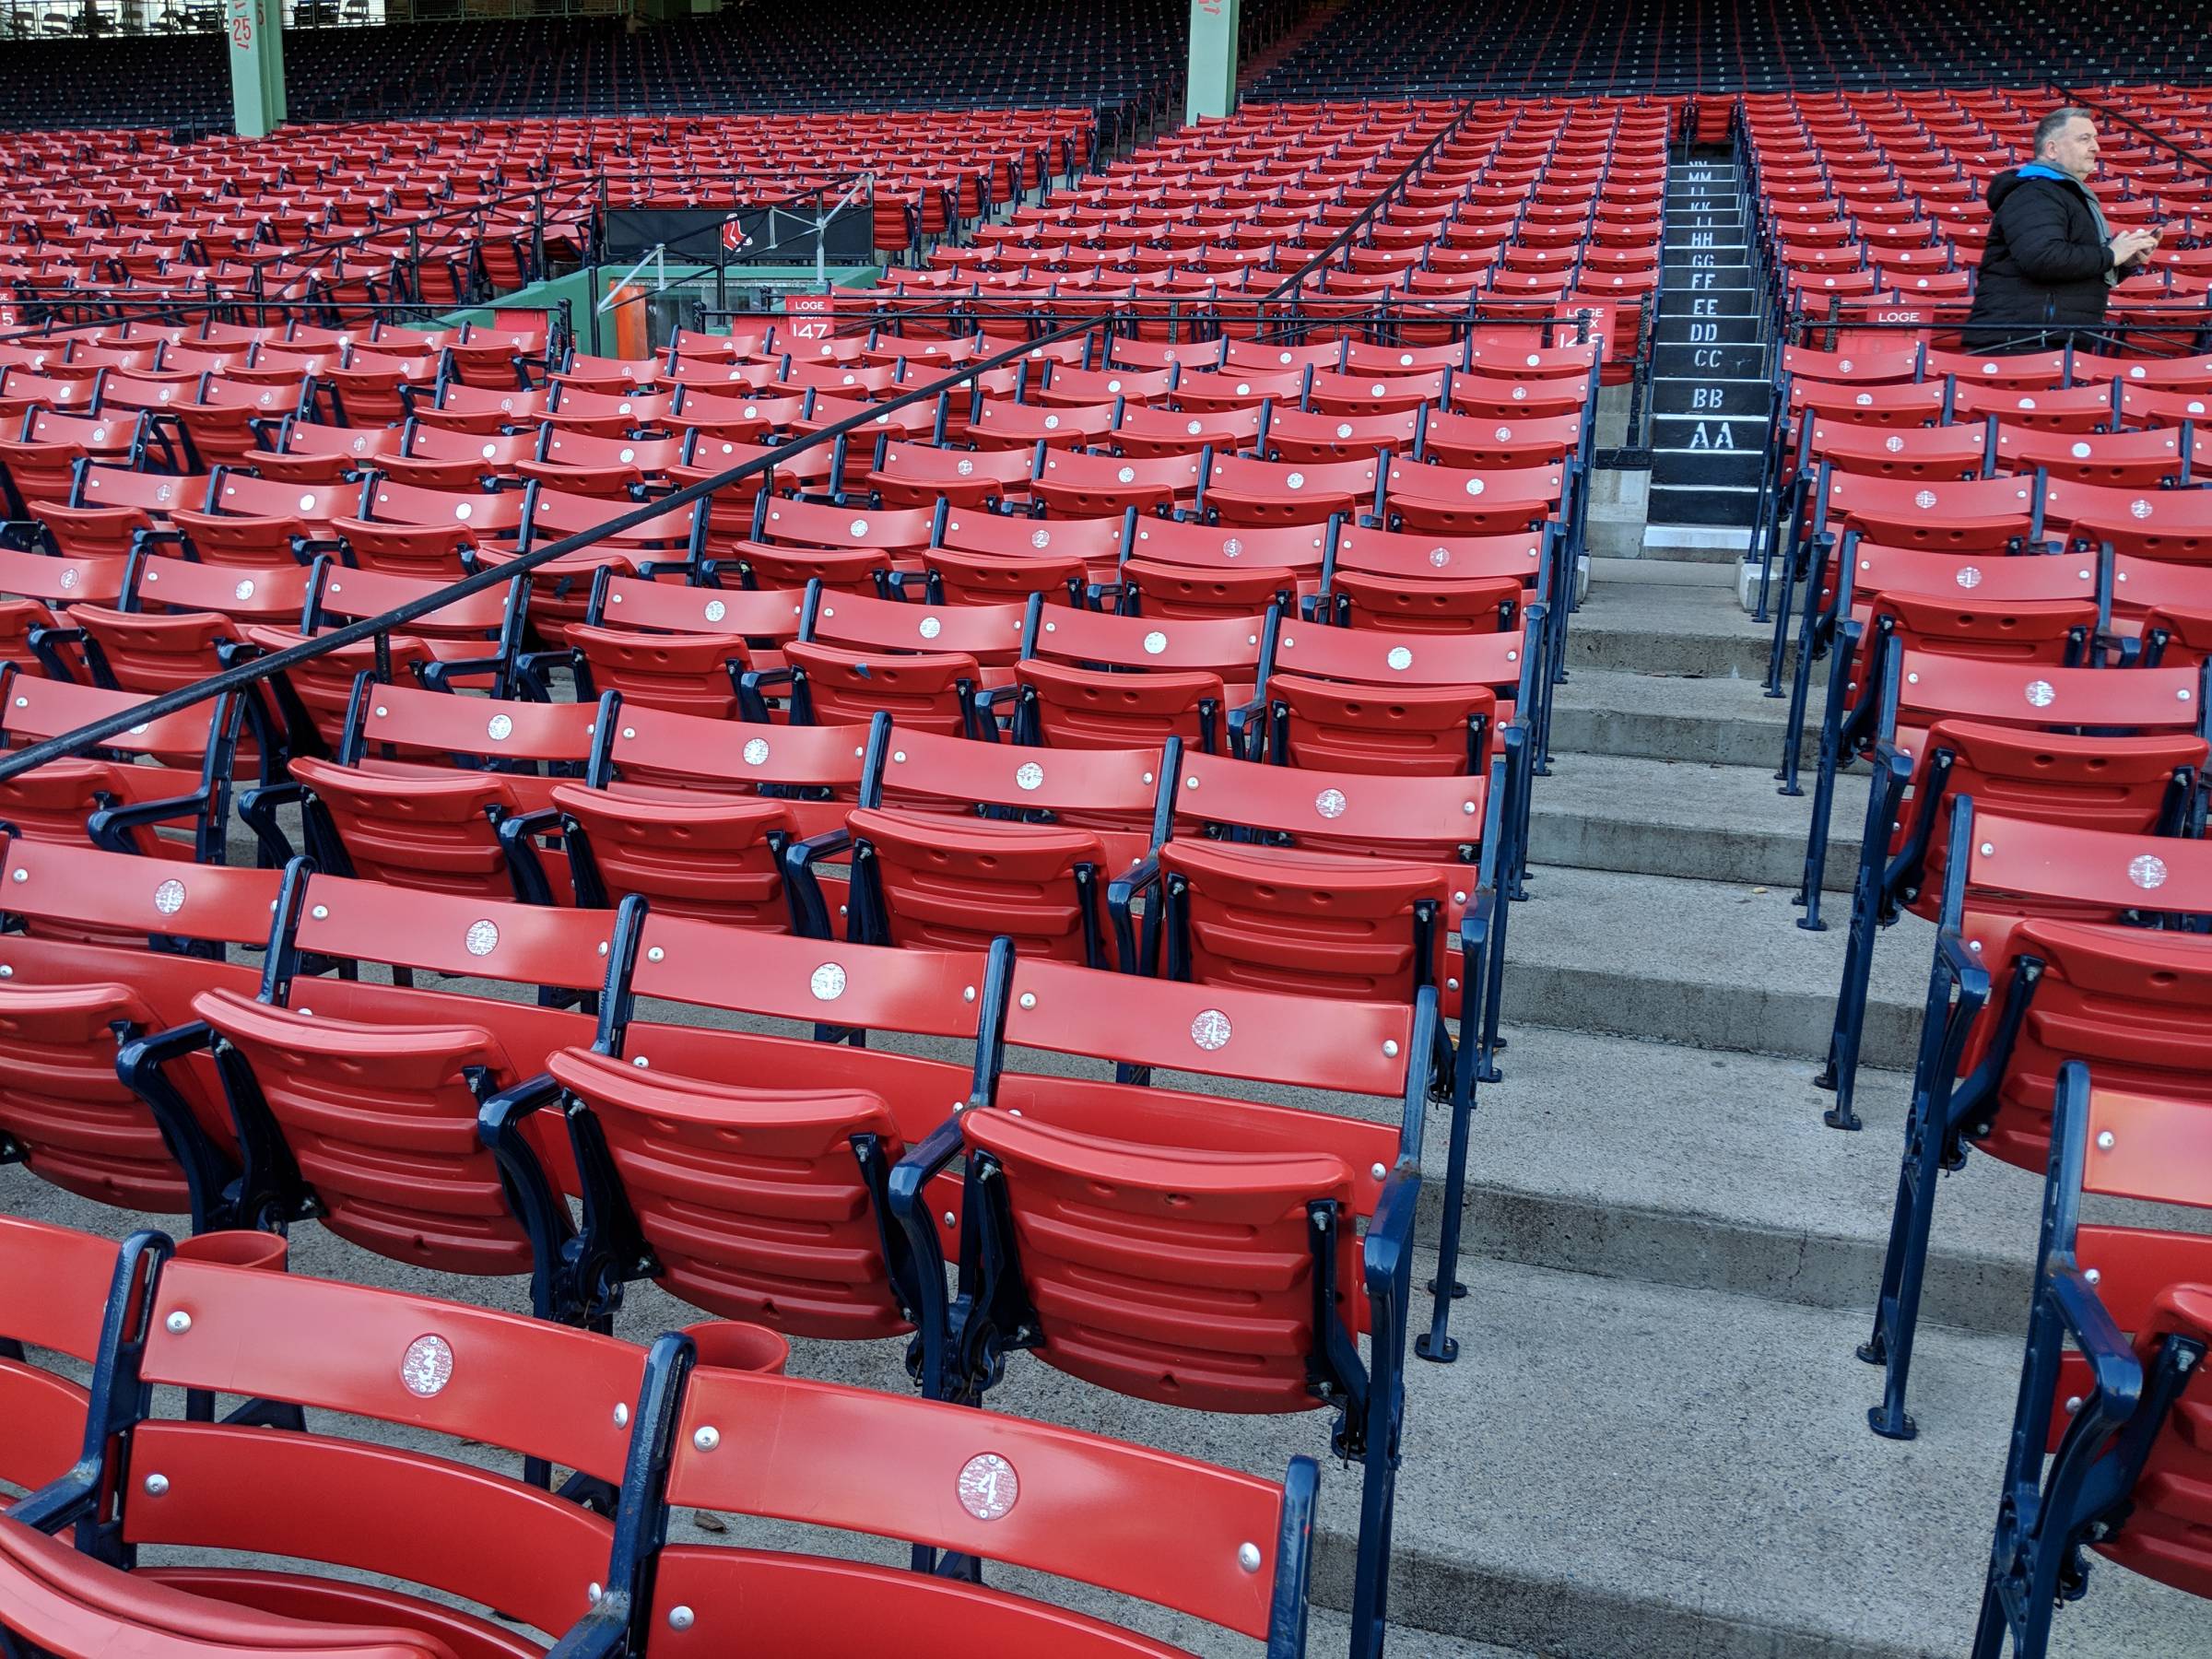 Best And Worst Seats At Fenway Park ? - Boston